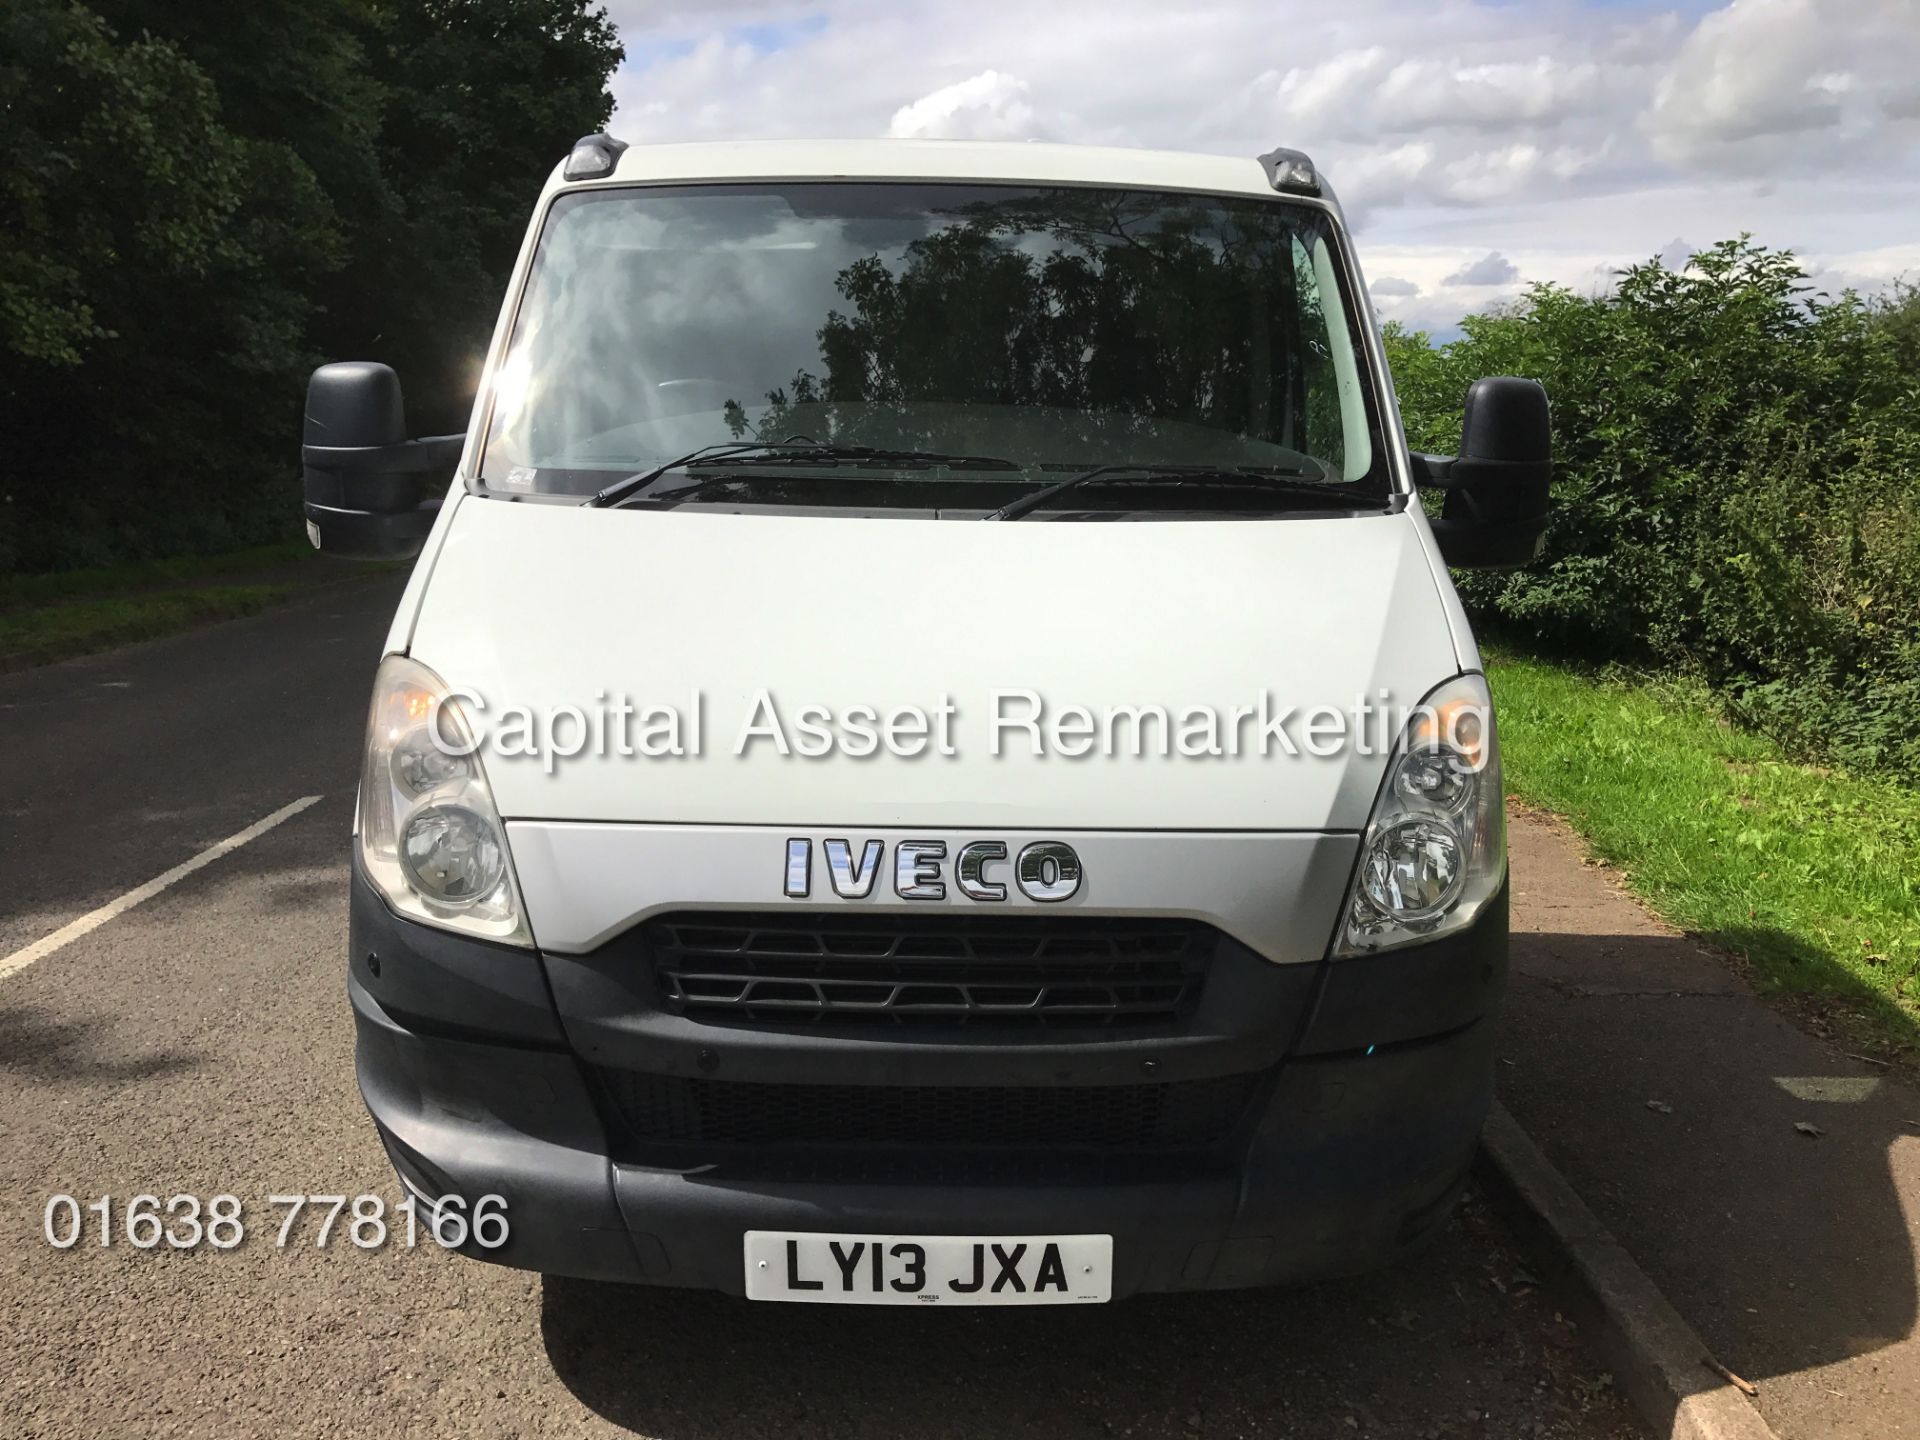 (On Sale) IVECO DAILY 35S11 LONG WHEEL BASE CHASSIS CAB - 13 REG - NEW SHAPE - EURO 5 - ELEC PACK - Image 2 of 10